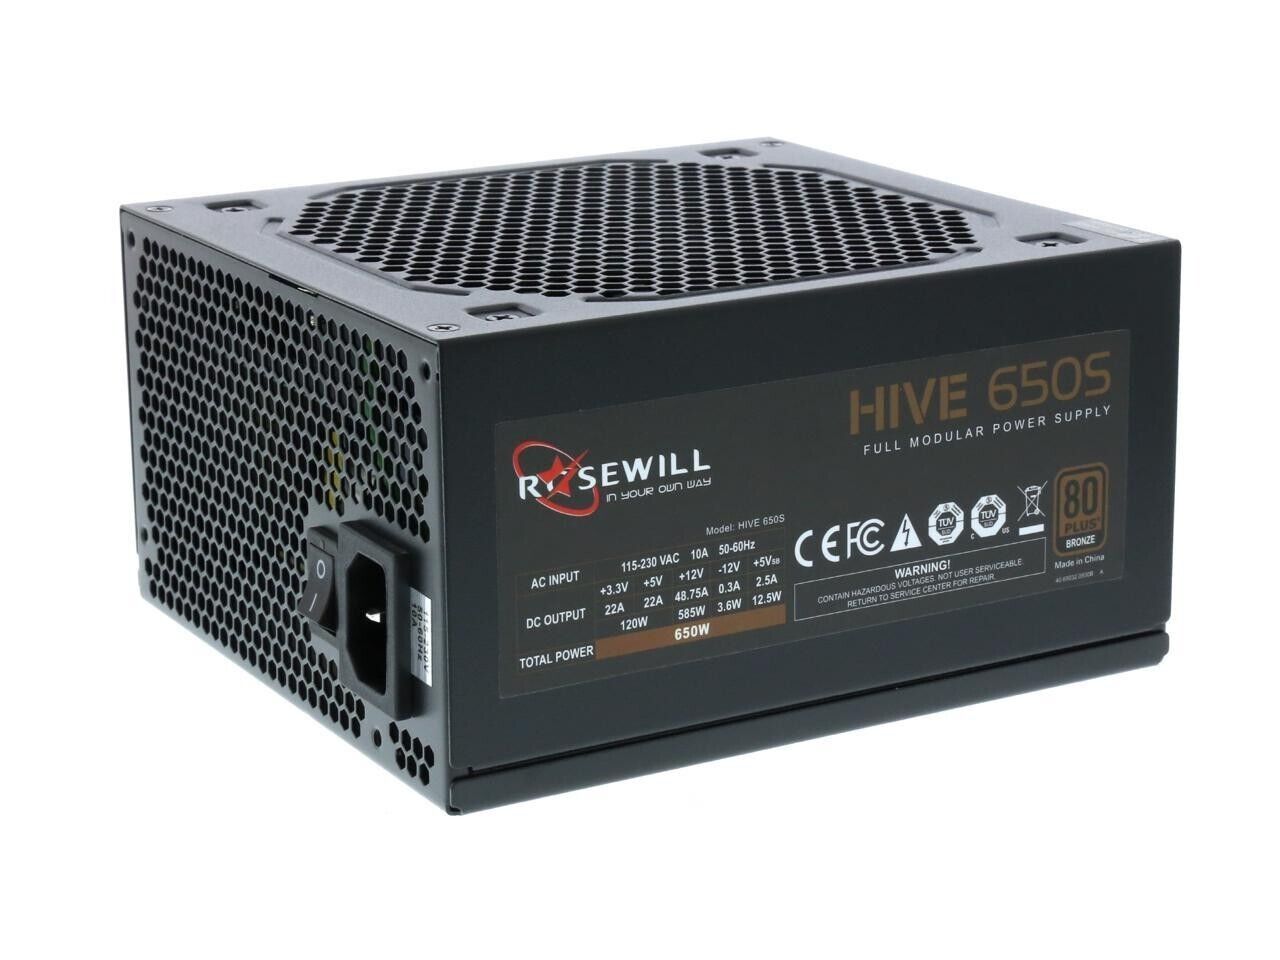 Rosewill HIVE Series, HIVE-1000S, 1000W Fully Modular Power Supply, 80 PLUS BRON